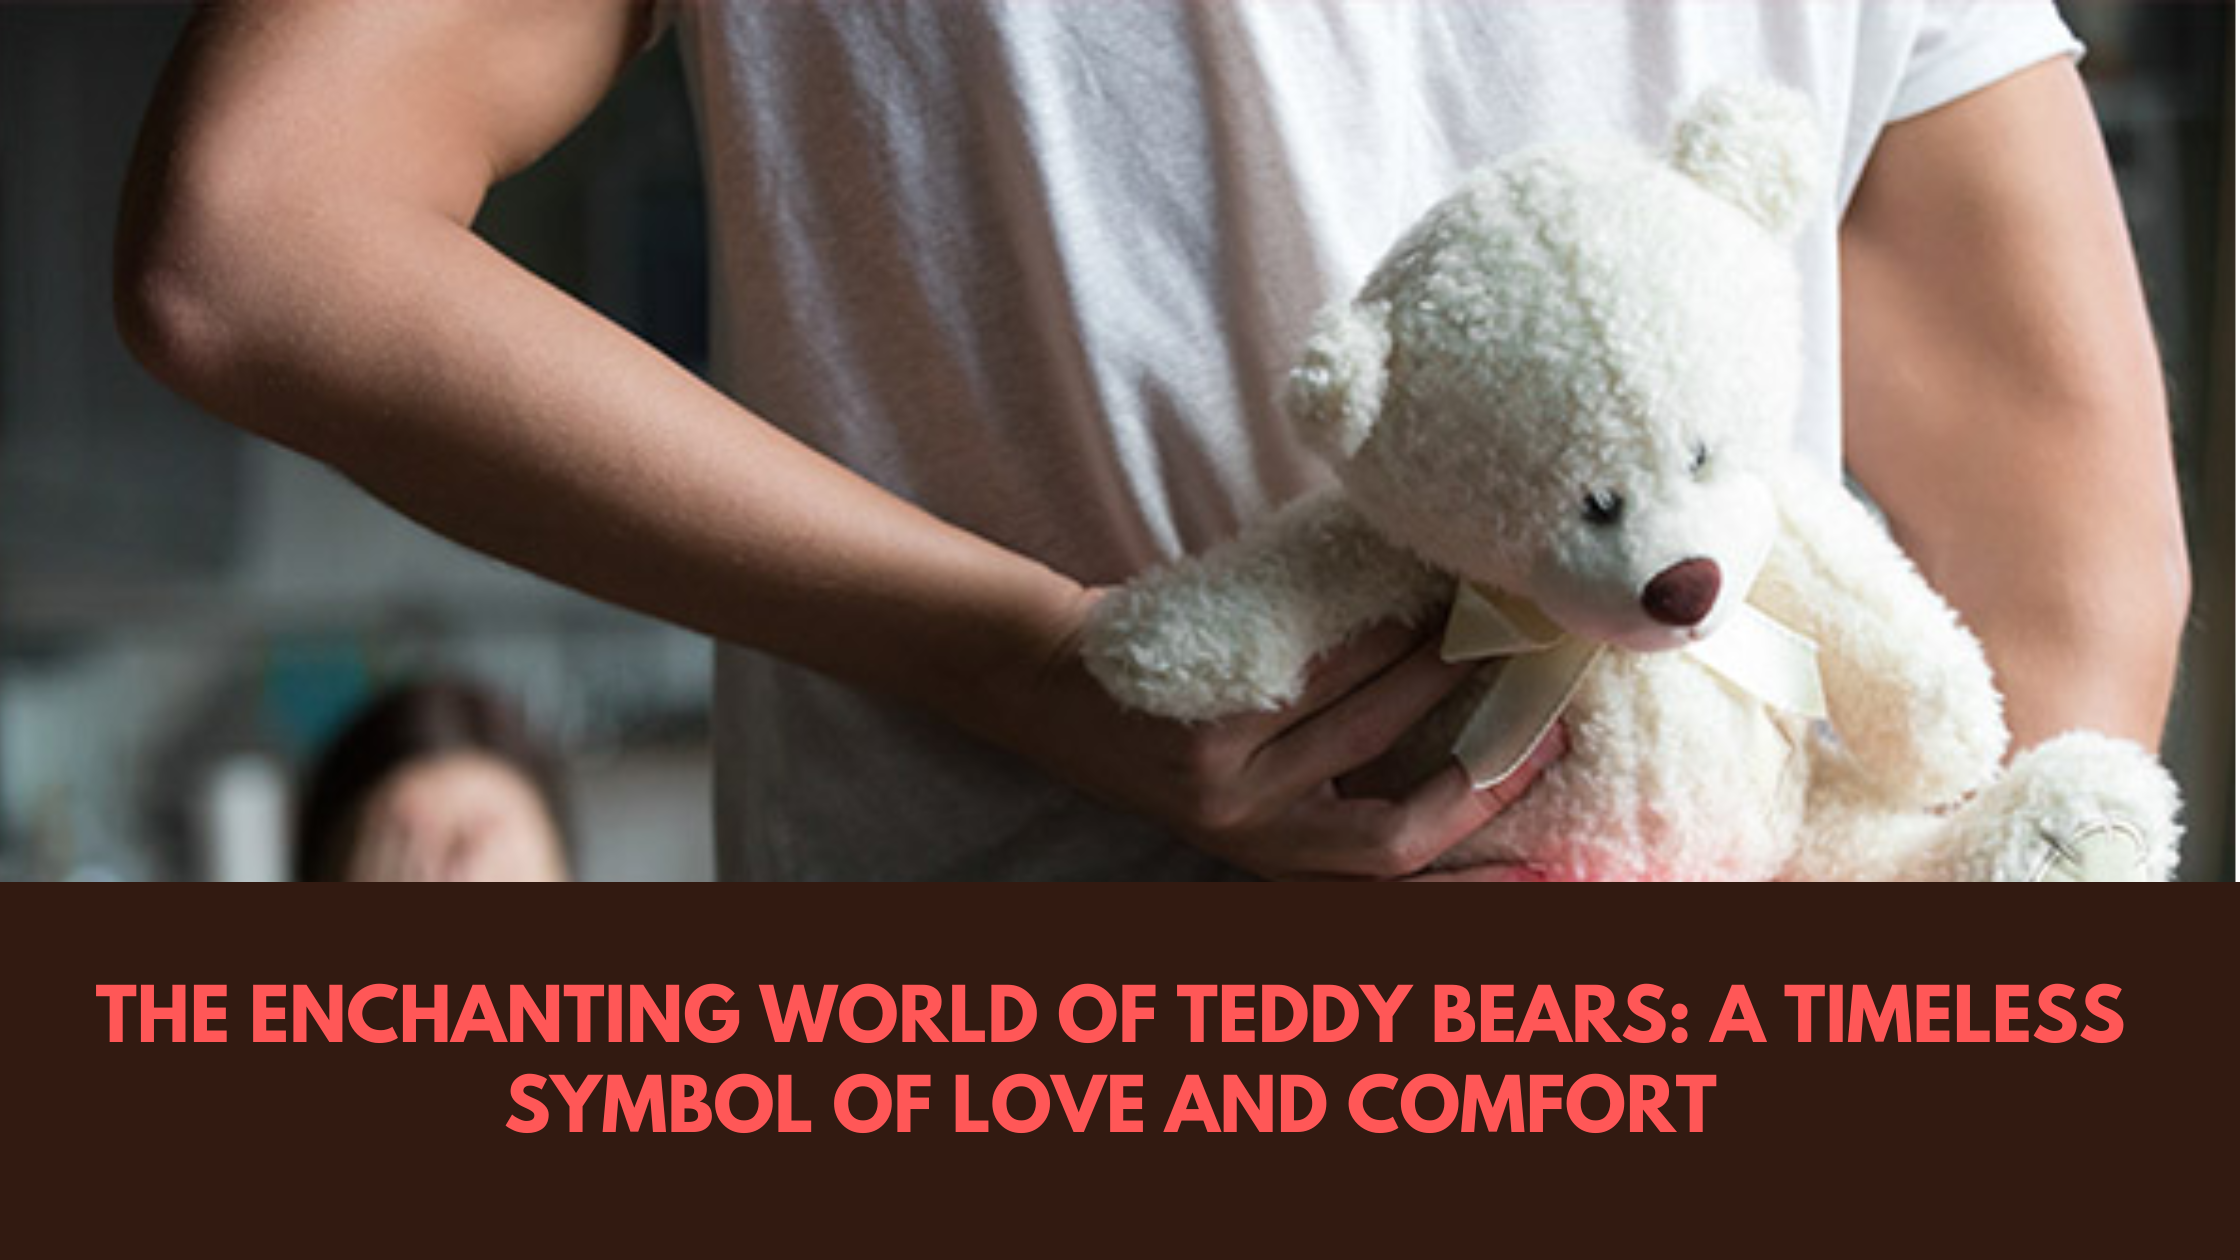 The Enchanting World of Teddy Bears: A Timeless Symbol of Love and Comfort